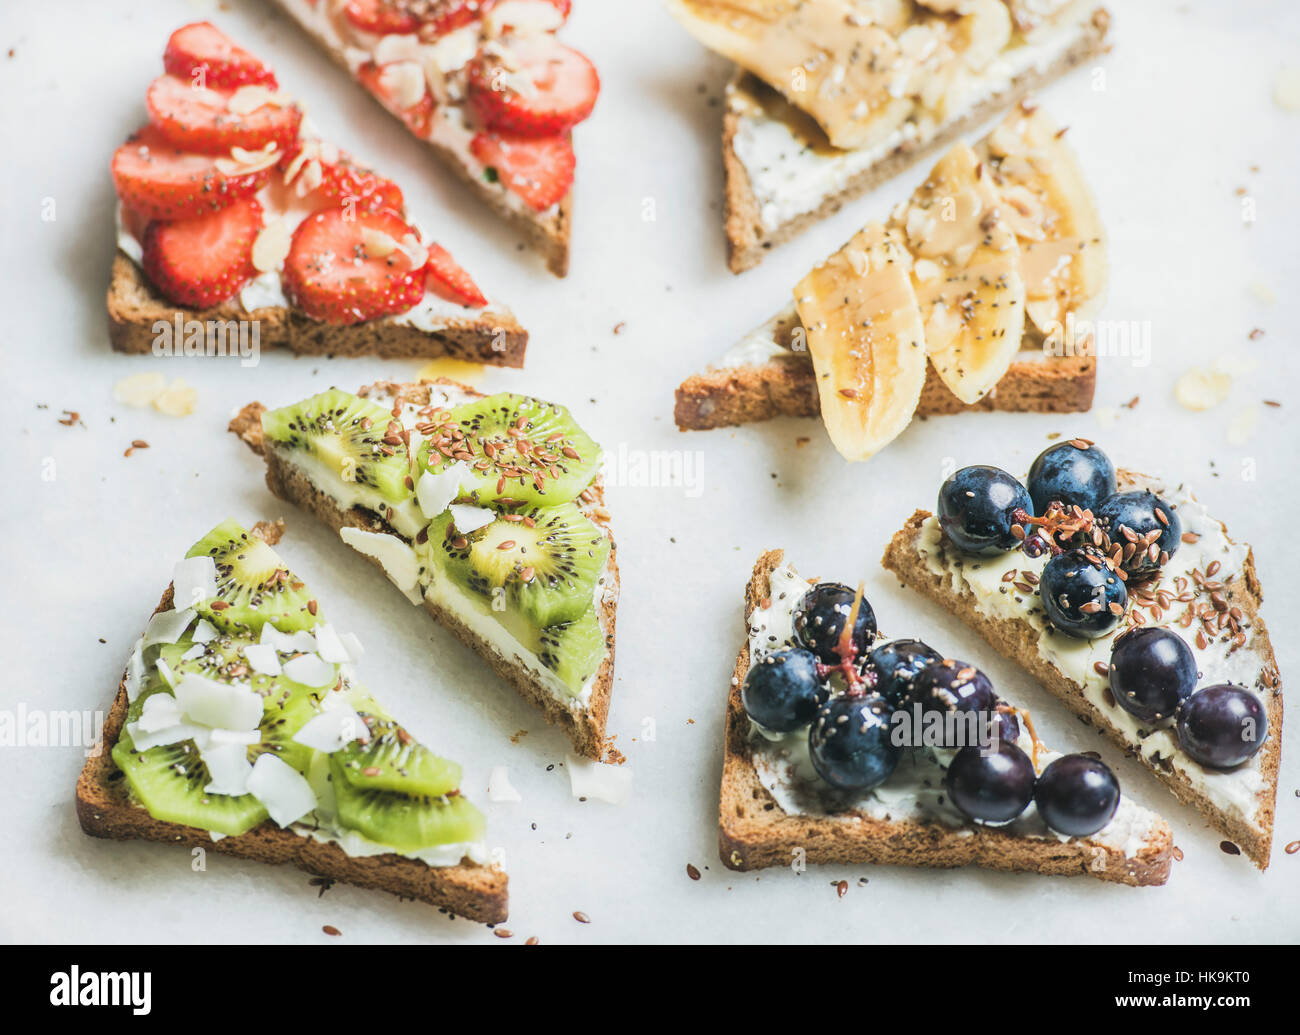 Healthy breakfast wholegrain bread toasts with cream cheese, various fruit, seeds and nuts. Top view, grey marble background. Clean eating, vegetarian Stock Photo